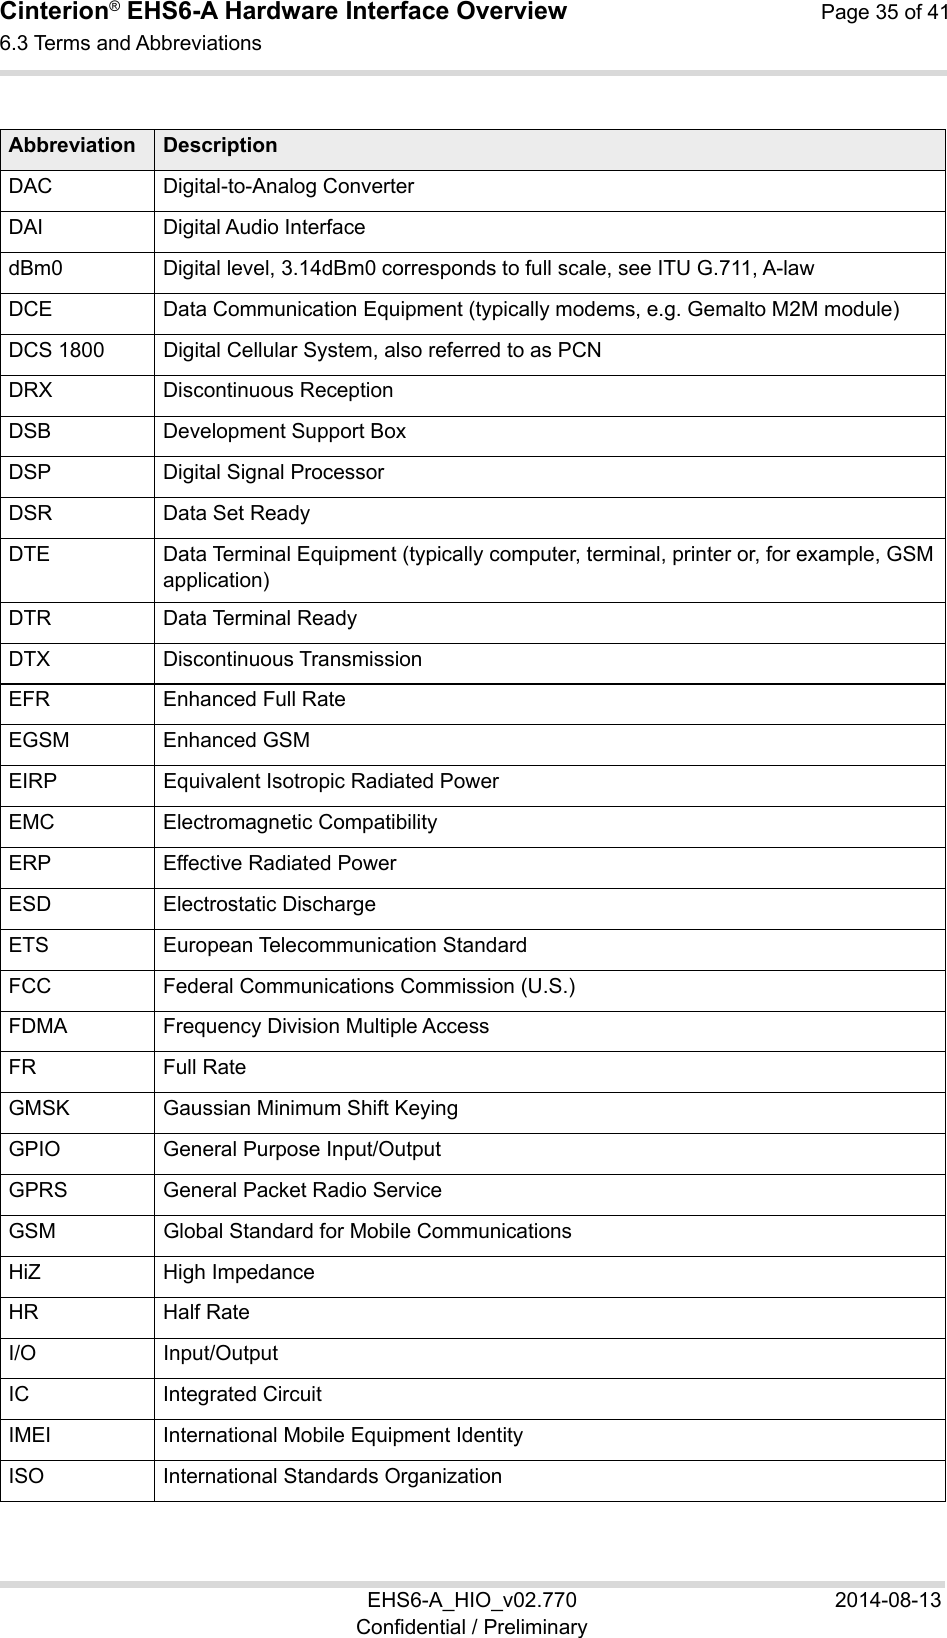 Cinterion® EHS6-A Hardware Interface Overview  Page 35 of 41 6.3 Terms and Abbreviations 37 EHS6-A_HIO_v02.770  2014-08-13 Confidential / Preliminary  Abbreviation Description DAC Digital-to-Analog ConverterDAI Digital Audio InterfacedBm0 Digital level, 3.14dBm0 corresponds to full scale, see ITU G.711, A-law DCE Data Communication Equipment (typically modems, e.g. Gemalto M2M module)DCS 1800 Digital Cellular System, also referred to as PCNDRX Discontinuous ReceptionDSB Development Support BoxDSP Digital Signal ProcessorDSR Data Set Ready DTE Data Terminal Equipment (typically computer, terminal, printer or, for example, GSM application) DTR Data Terminal Ready DTX Discontinuous TransmissionEFR Enhanced Full Rate EGSM Enhanced GSM EIRP Equivalent Isotropic Radiated PowerEMC Electromagnetic CompatibilityERP Effective Radiated PowerESD Electrostatic DischargeETS European Telecommunication StandardFCC Federal Communications Commission (U.S.)FDMA Frequency Division Multiple AccessFR Full Rate GMSK Gaussian Minimum Shift KeyingGPIO General Purpose Input/OutputGPRS General Packet Radio ServiceGSM Global Standard for Mobile CommunicationsHiZ High Impedance HR Half Rate I/O Input/Output IC Integrated Circuit IMEI International Mobile Equipment IdentityISO International Standards Organization